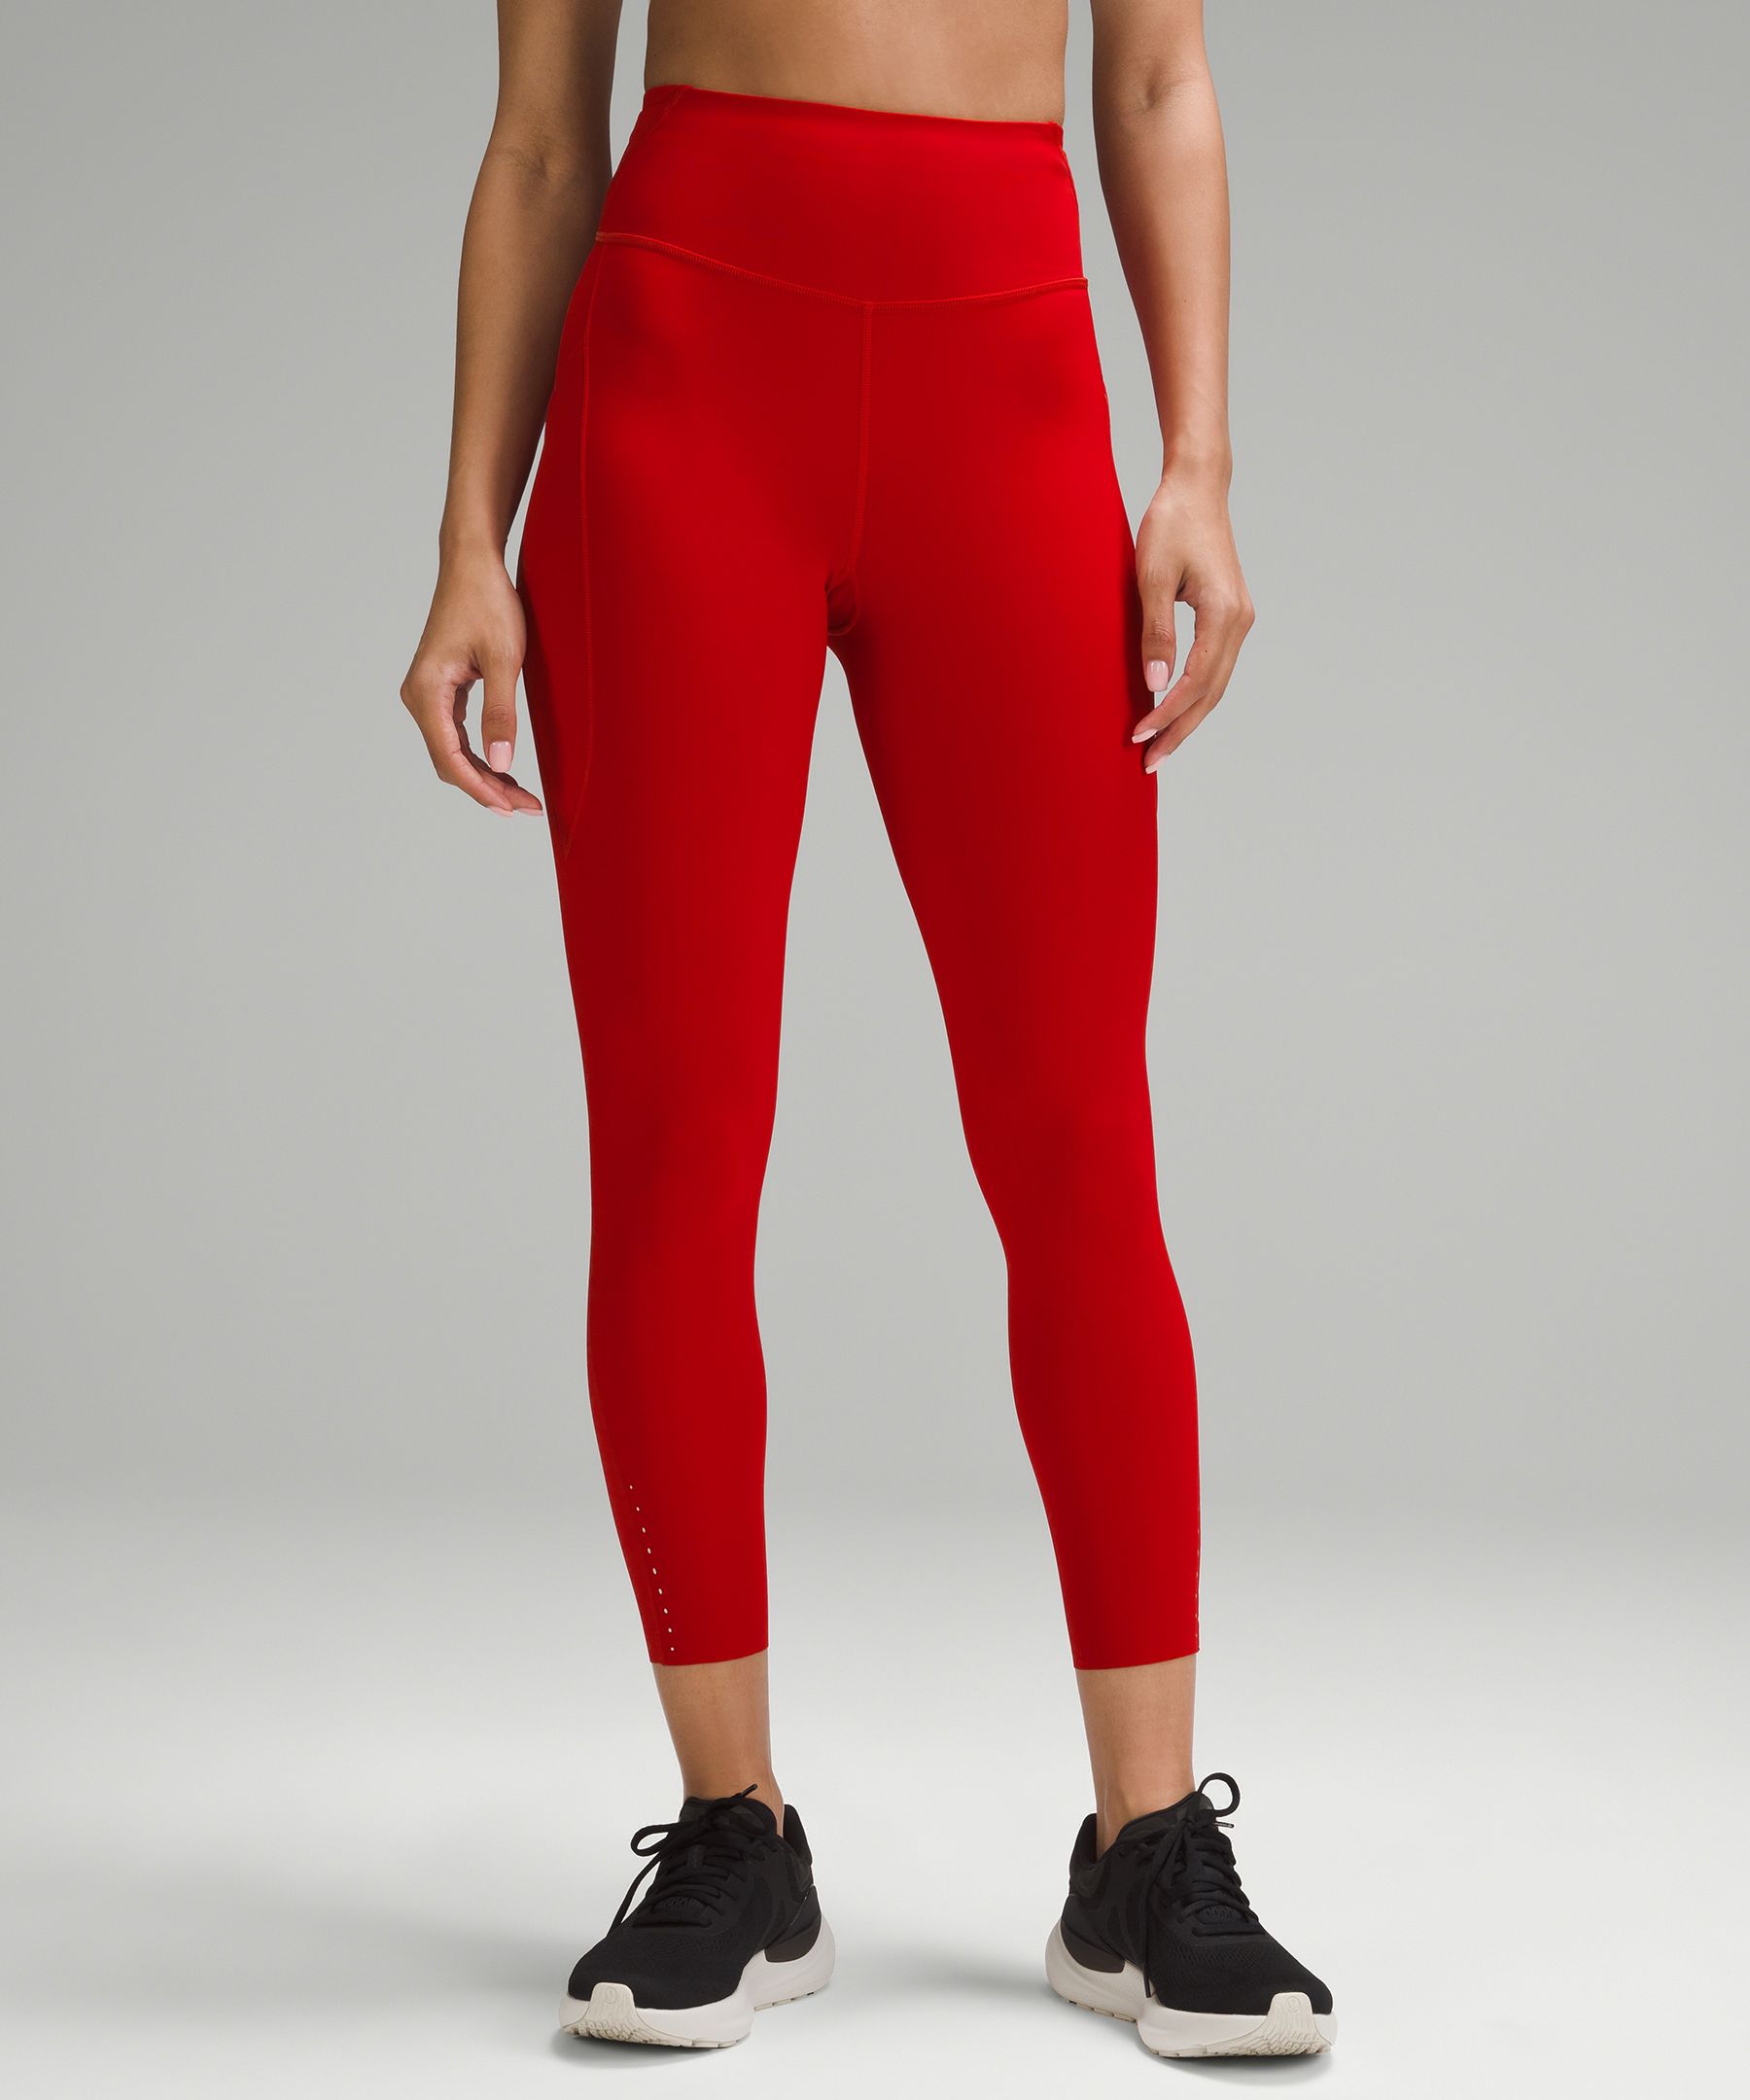 Lululemon Fast and Free High-Rise Tight 25” in